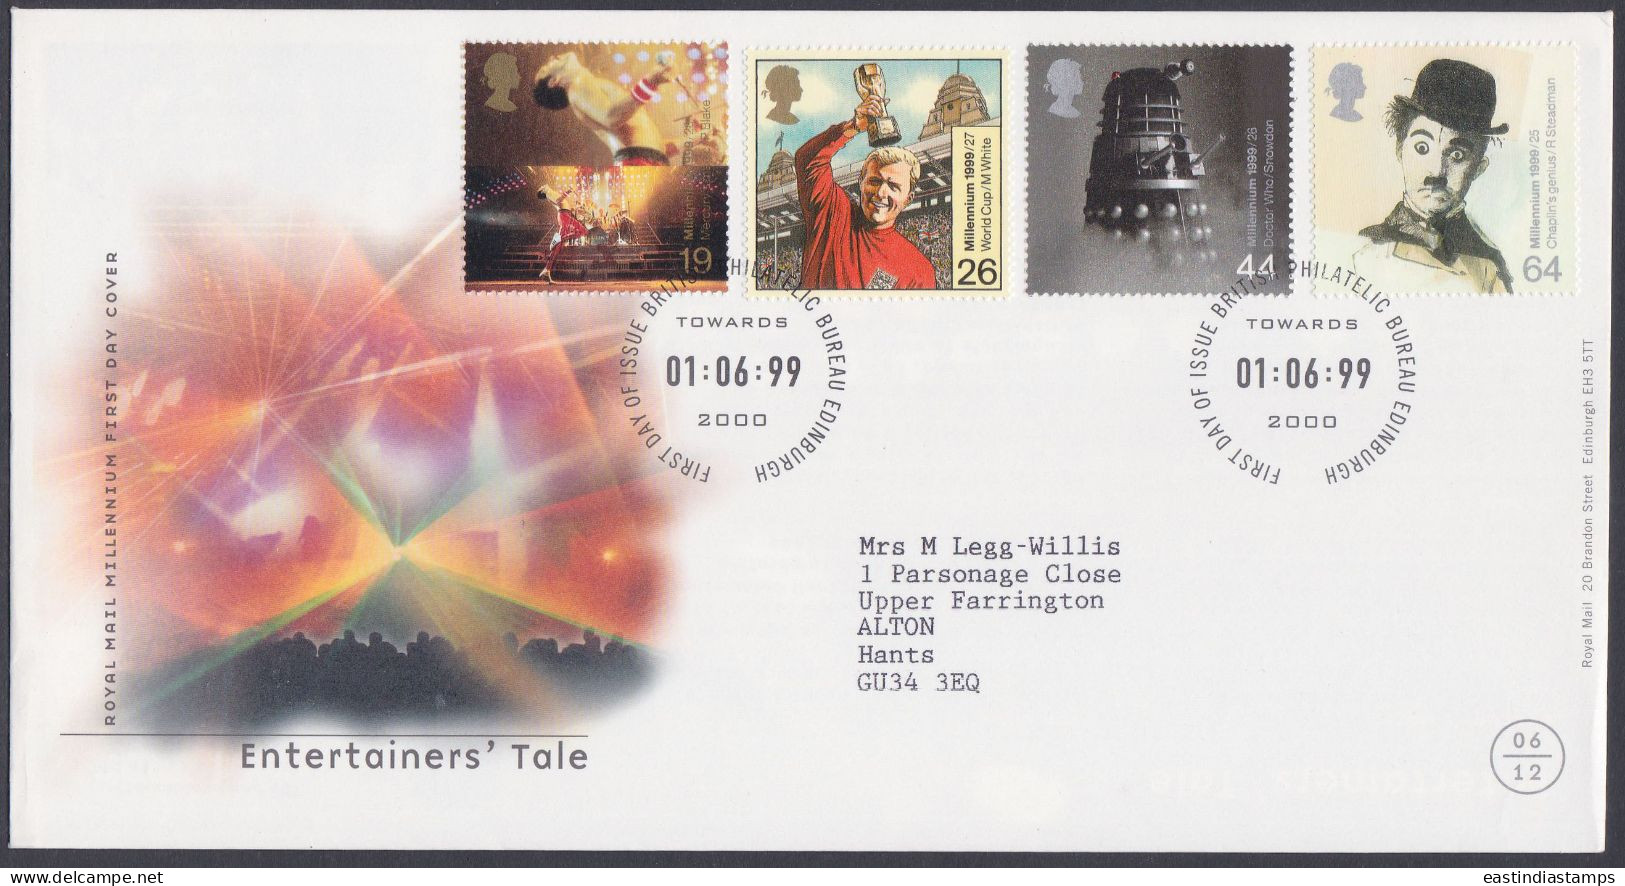 GB Great Britain 1999 FDC Entertainers' Tale, Charlie Chaplin, Film, Football, Music Pictorial Postmark, First Day Cover - Covers & Documents